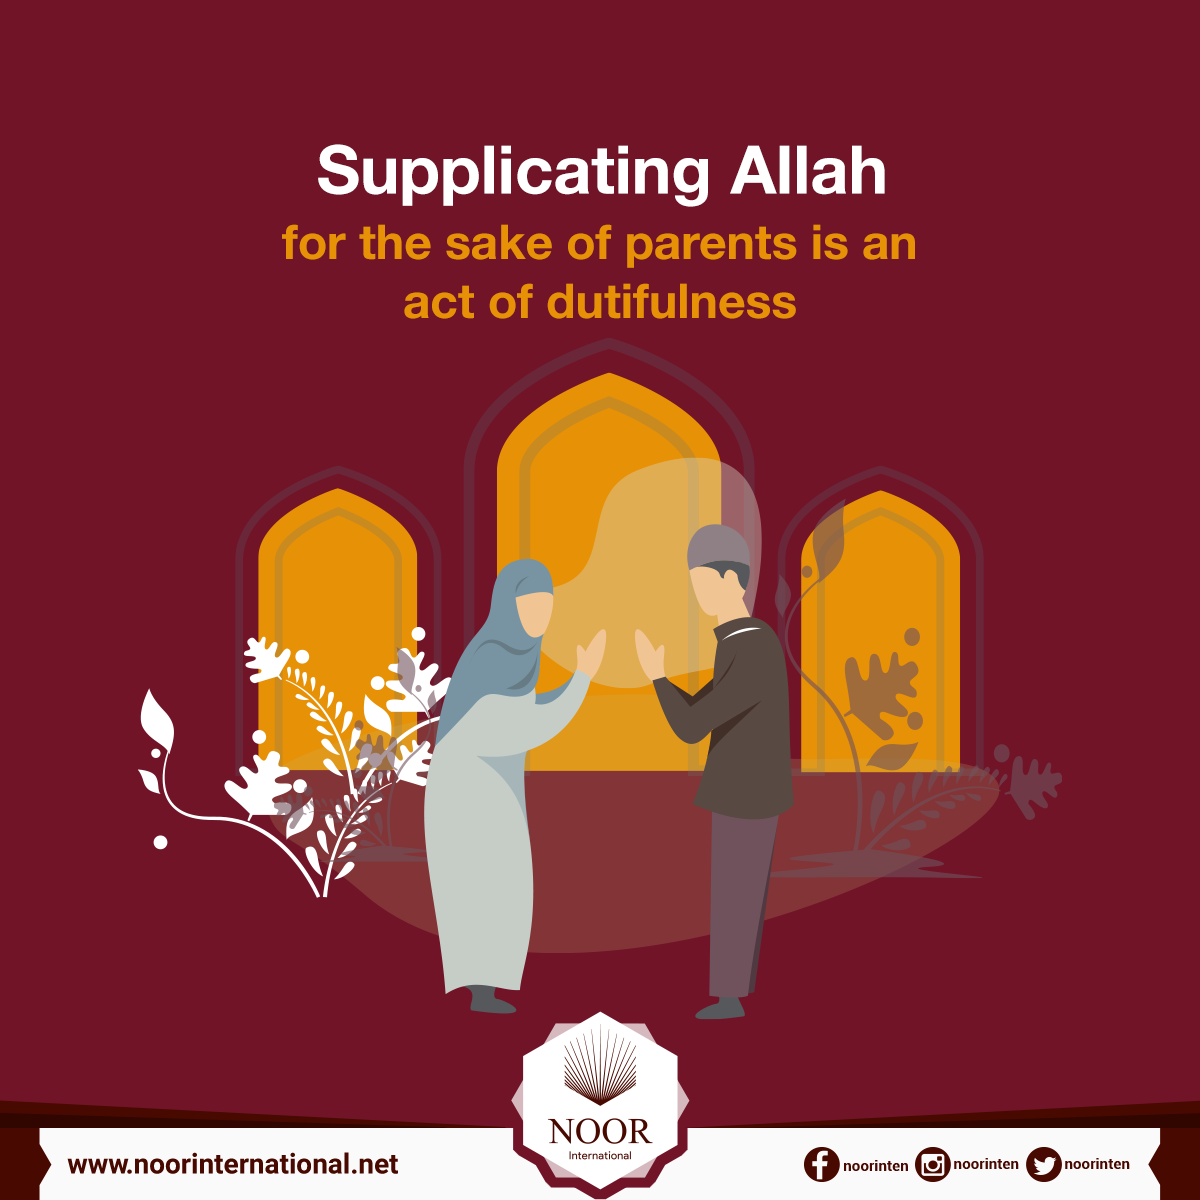 Supplicating Allah for the sake of parents is an act of dutifulness